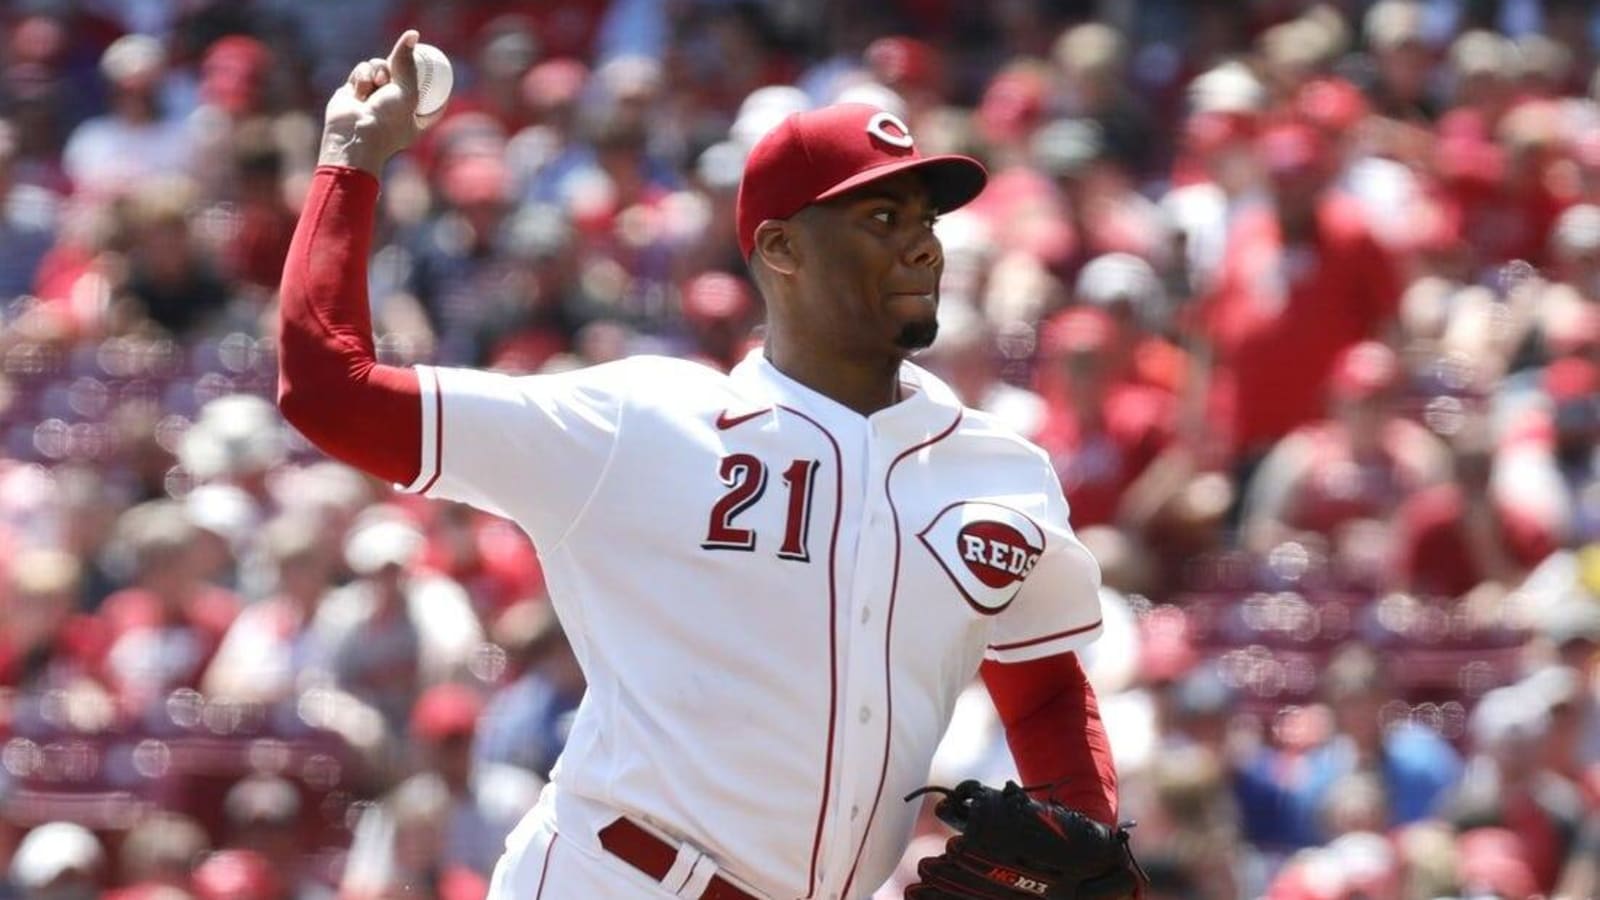 RHP Hunter Greene roughed up in return to Reds